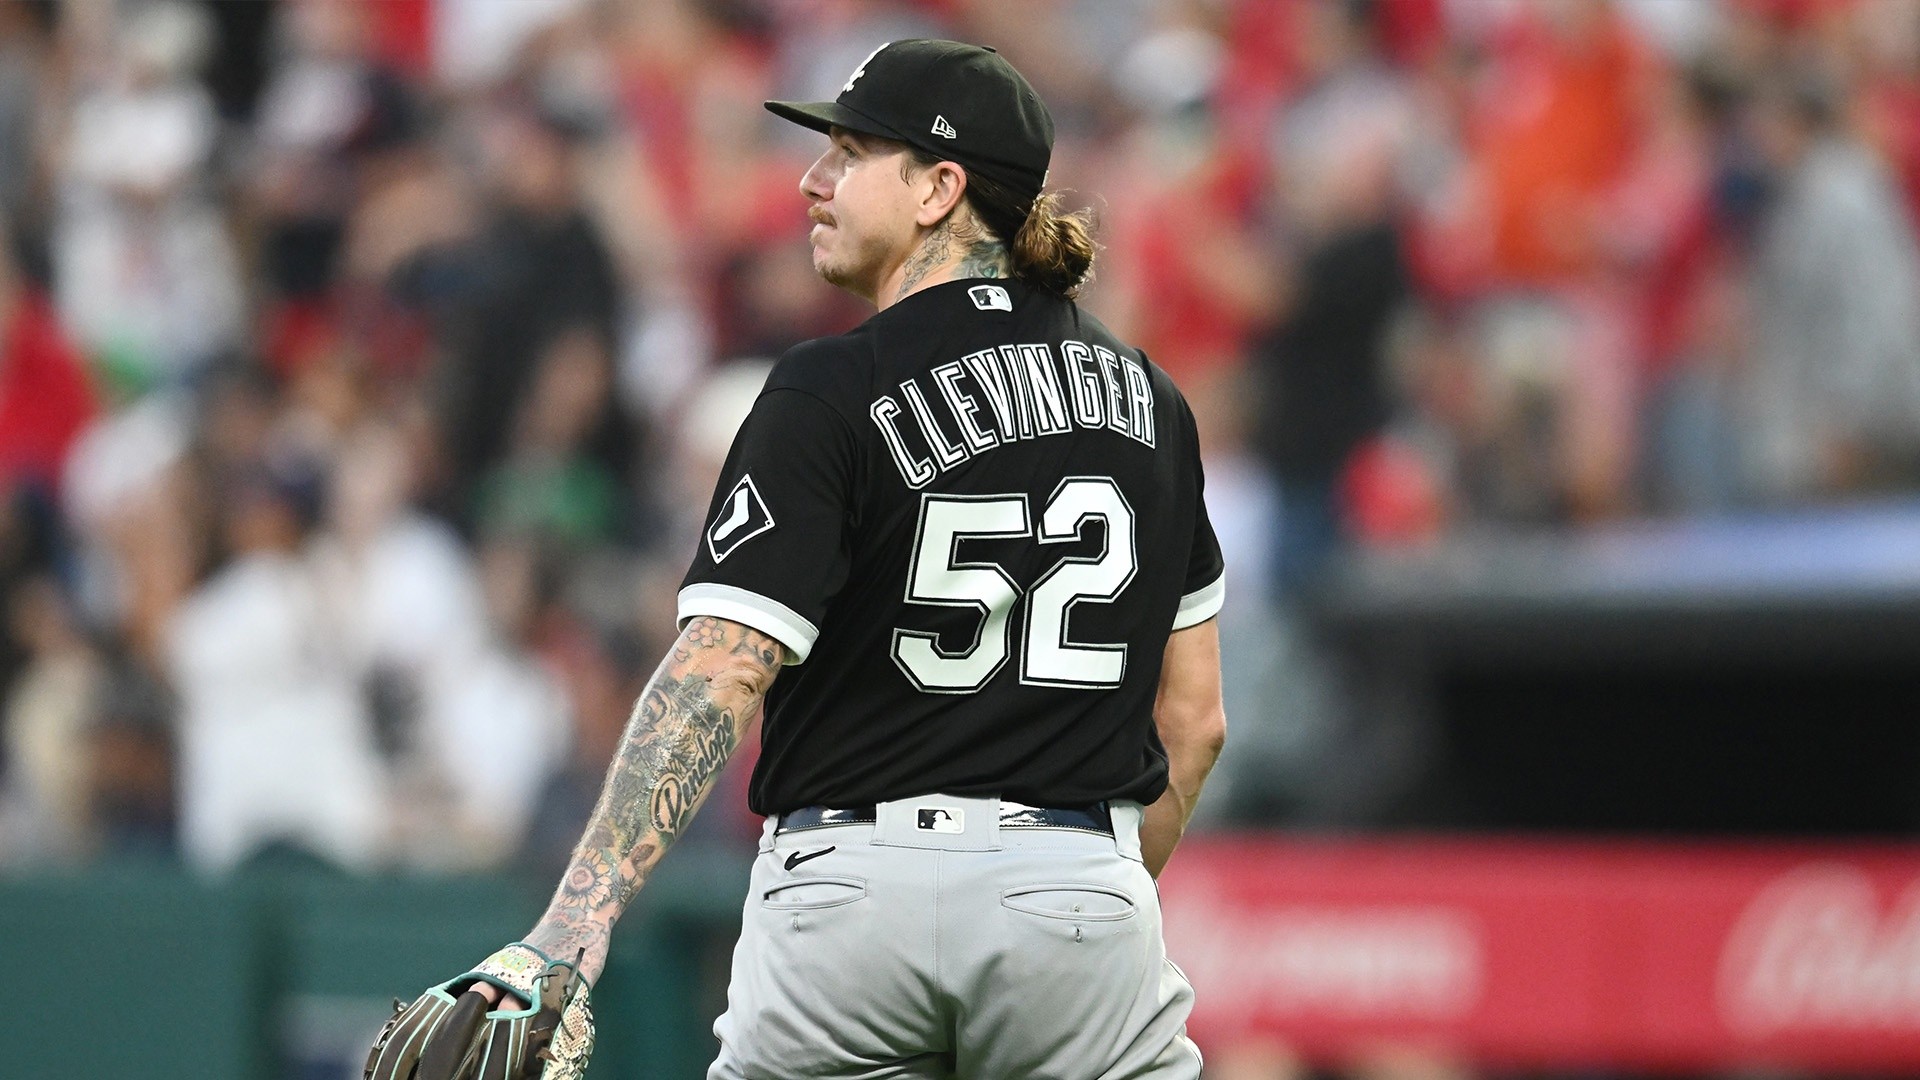 Mike Clevinger debuts as a Chicago White Sox